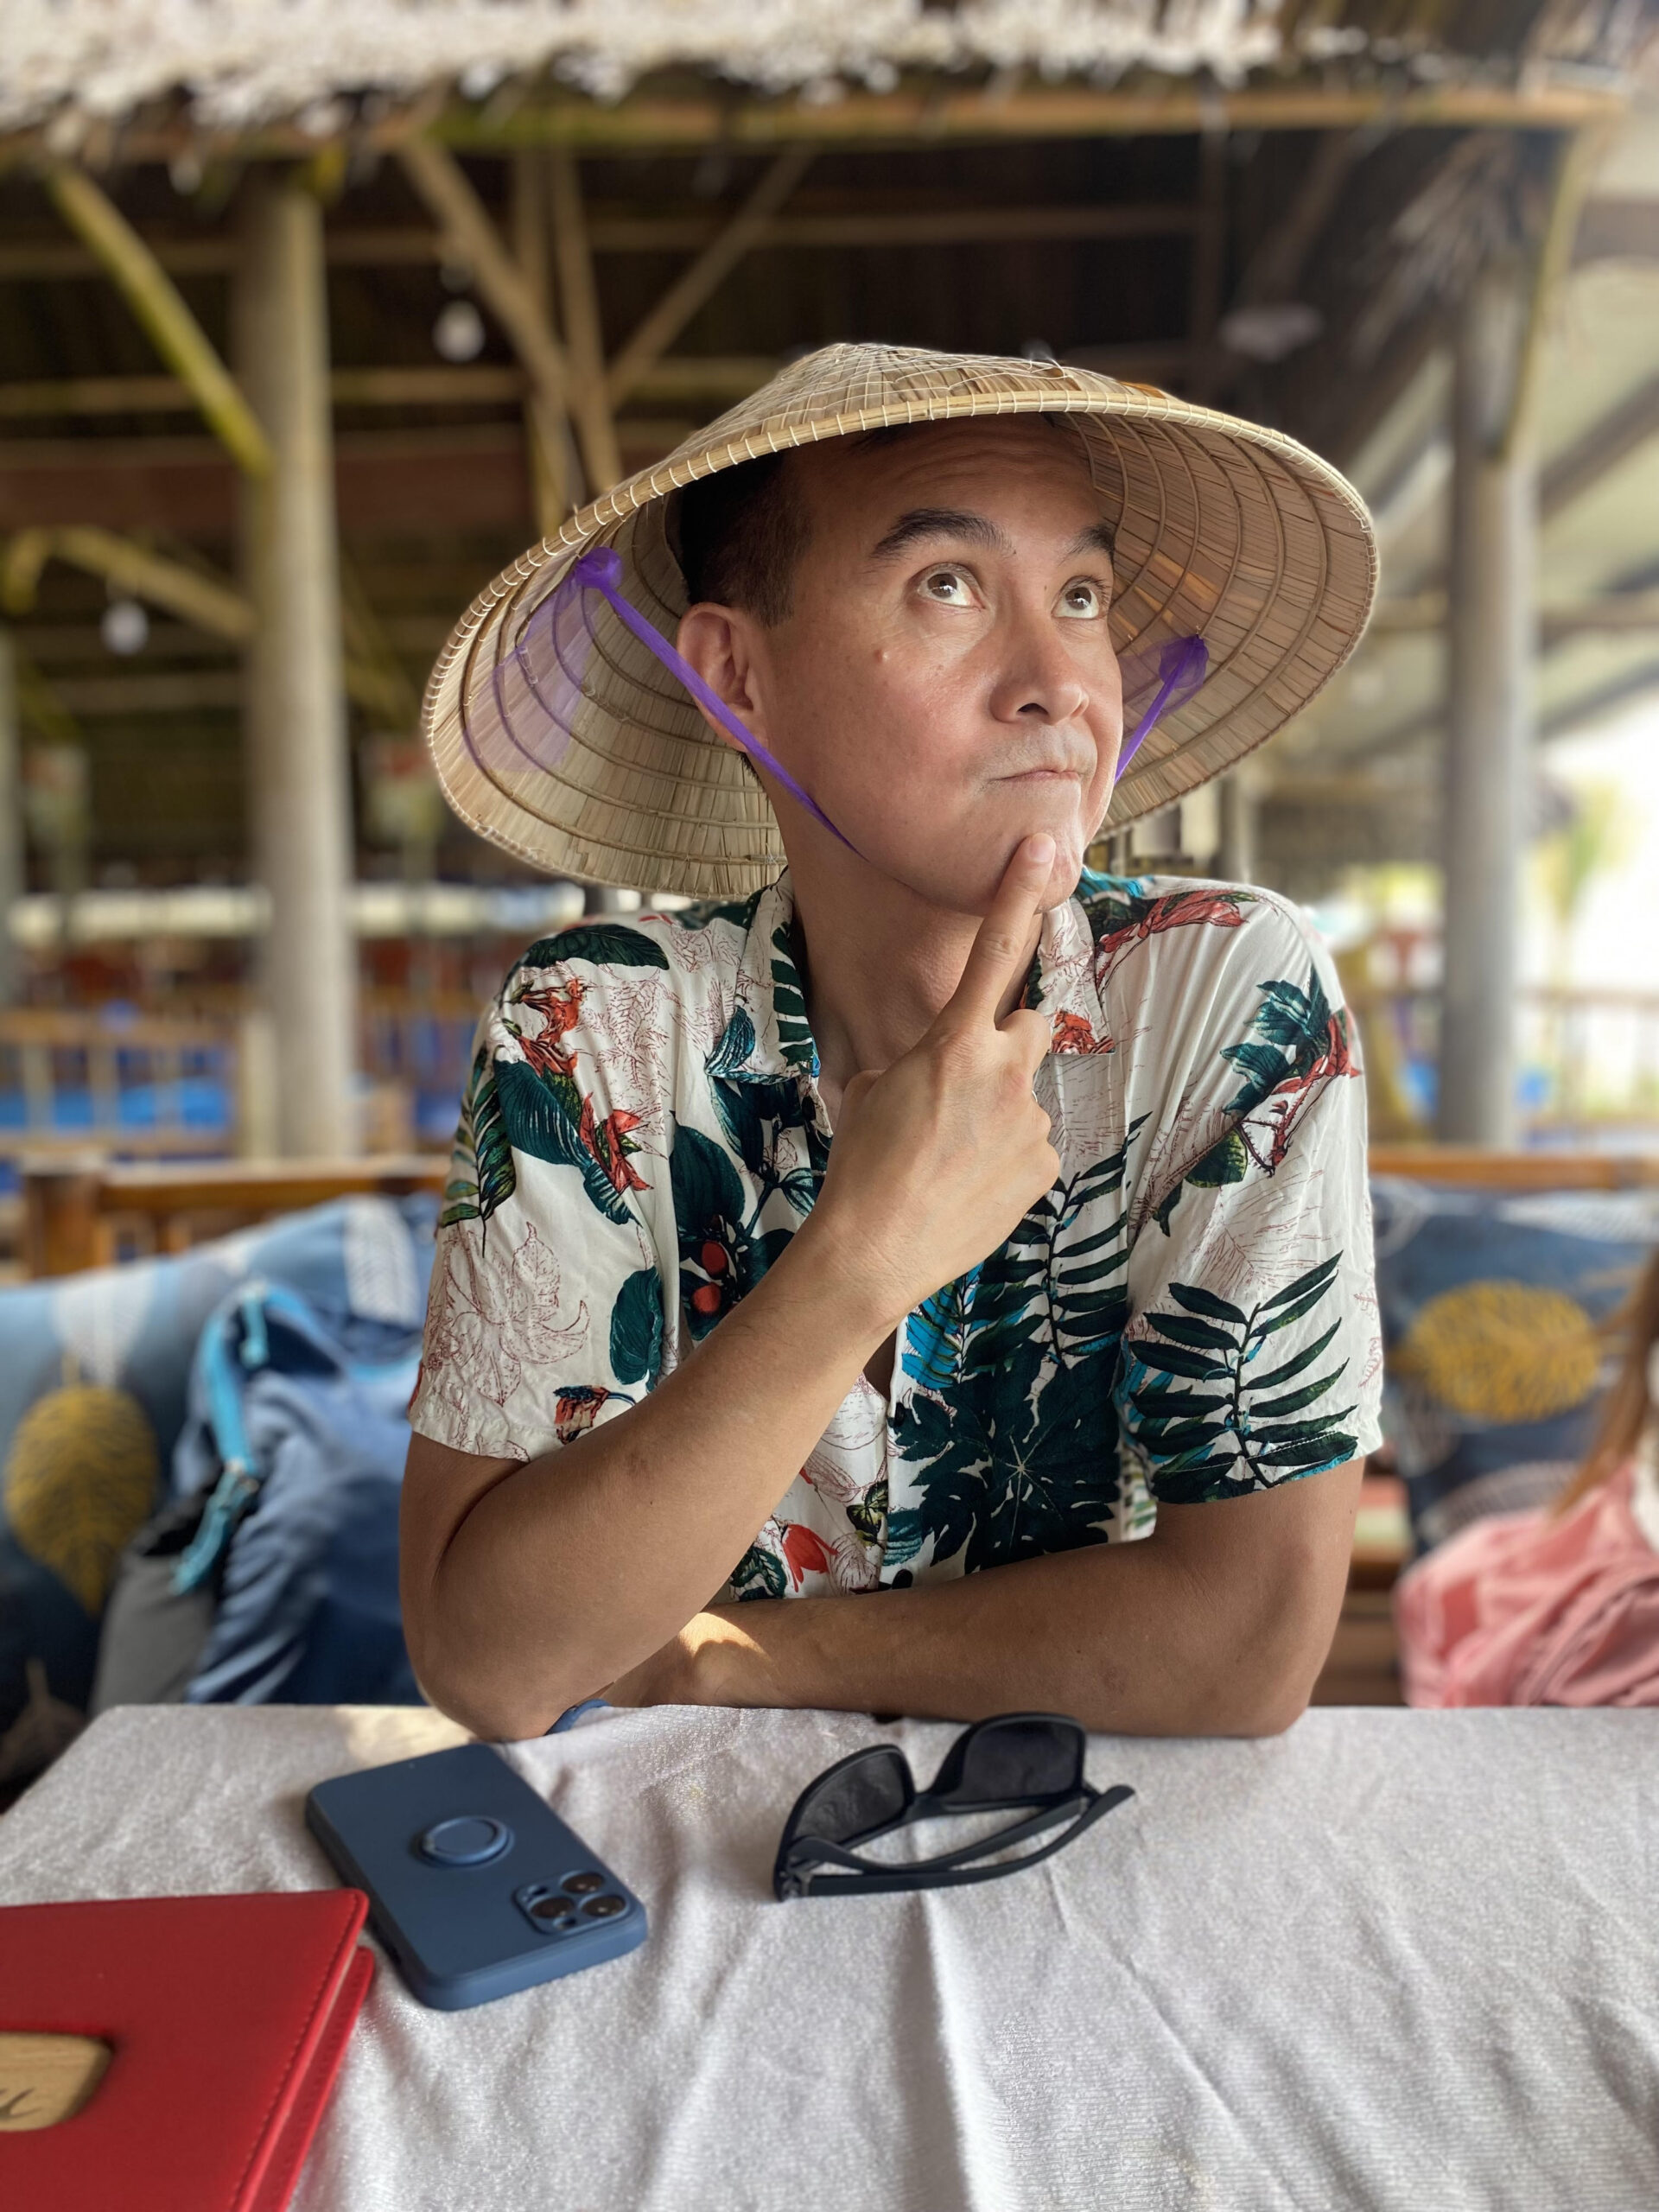 Paul wearing a traditional Vietnamese straw hat while waiting for lunch.